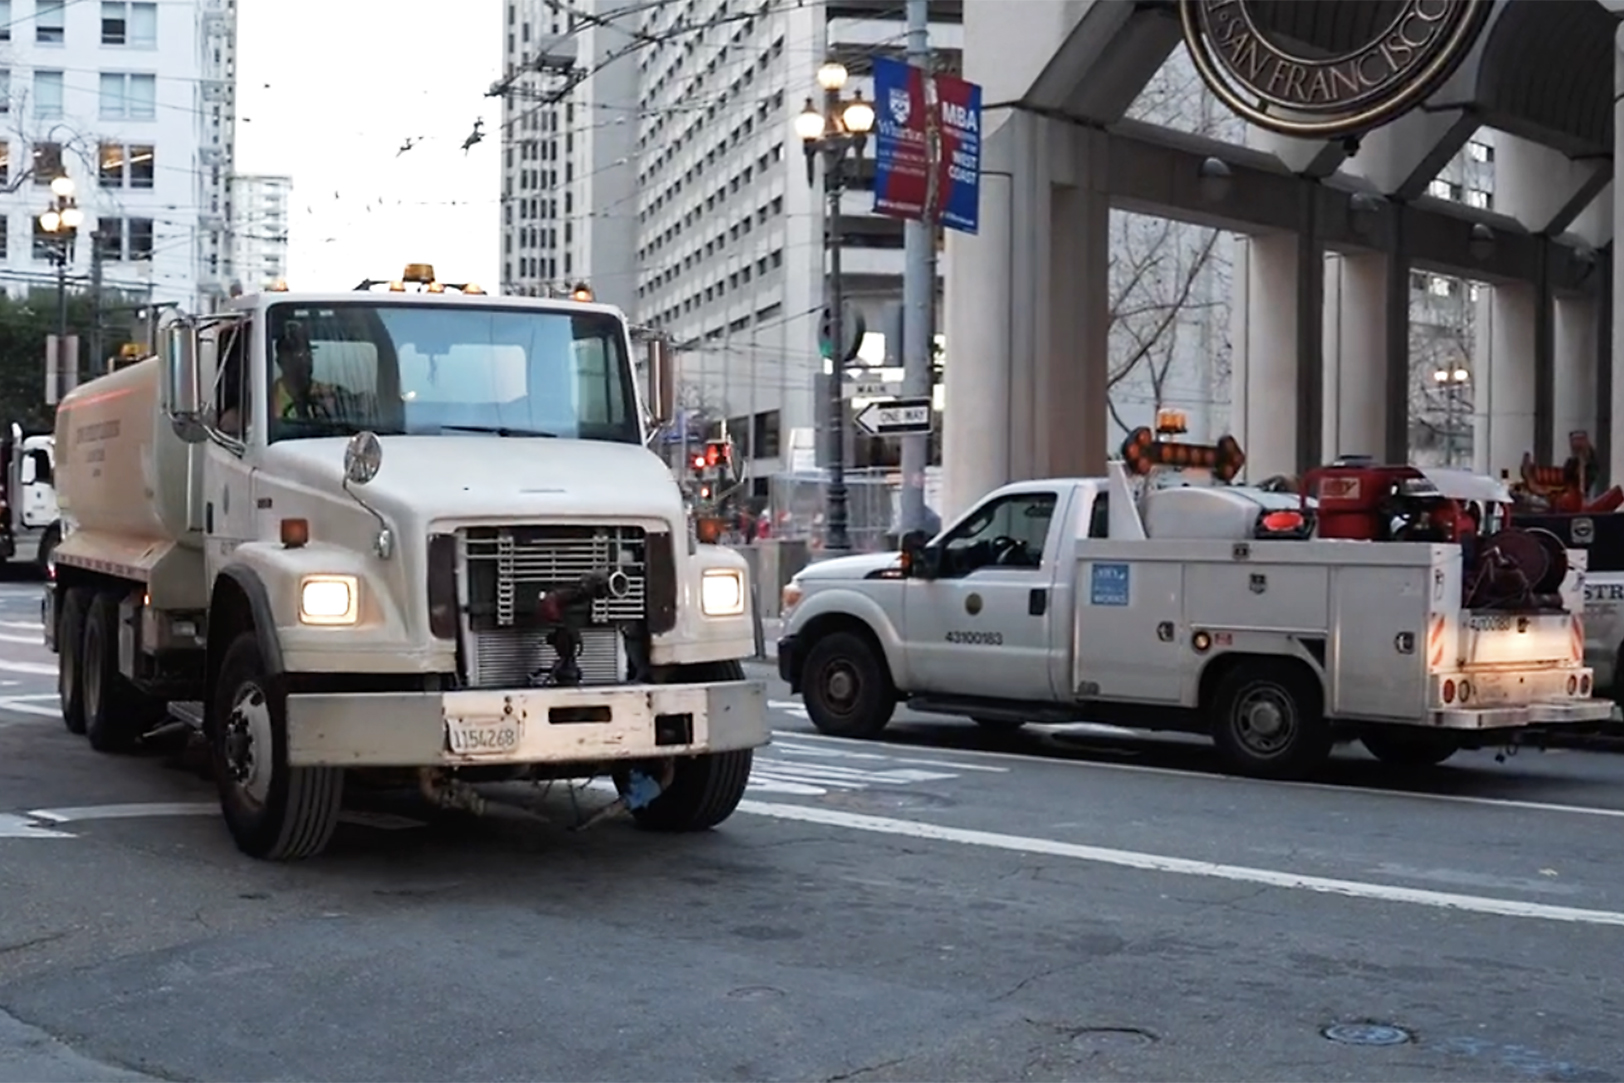 Two white service trucks are on a city street with tall buildings and streetlights.